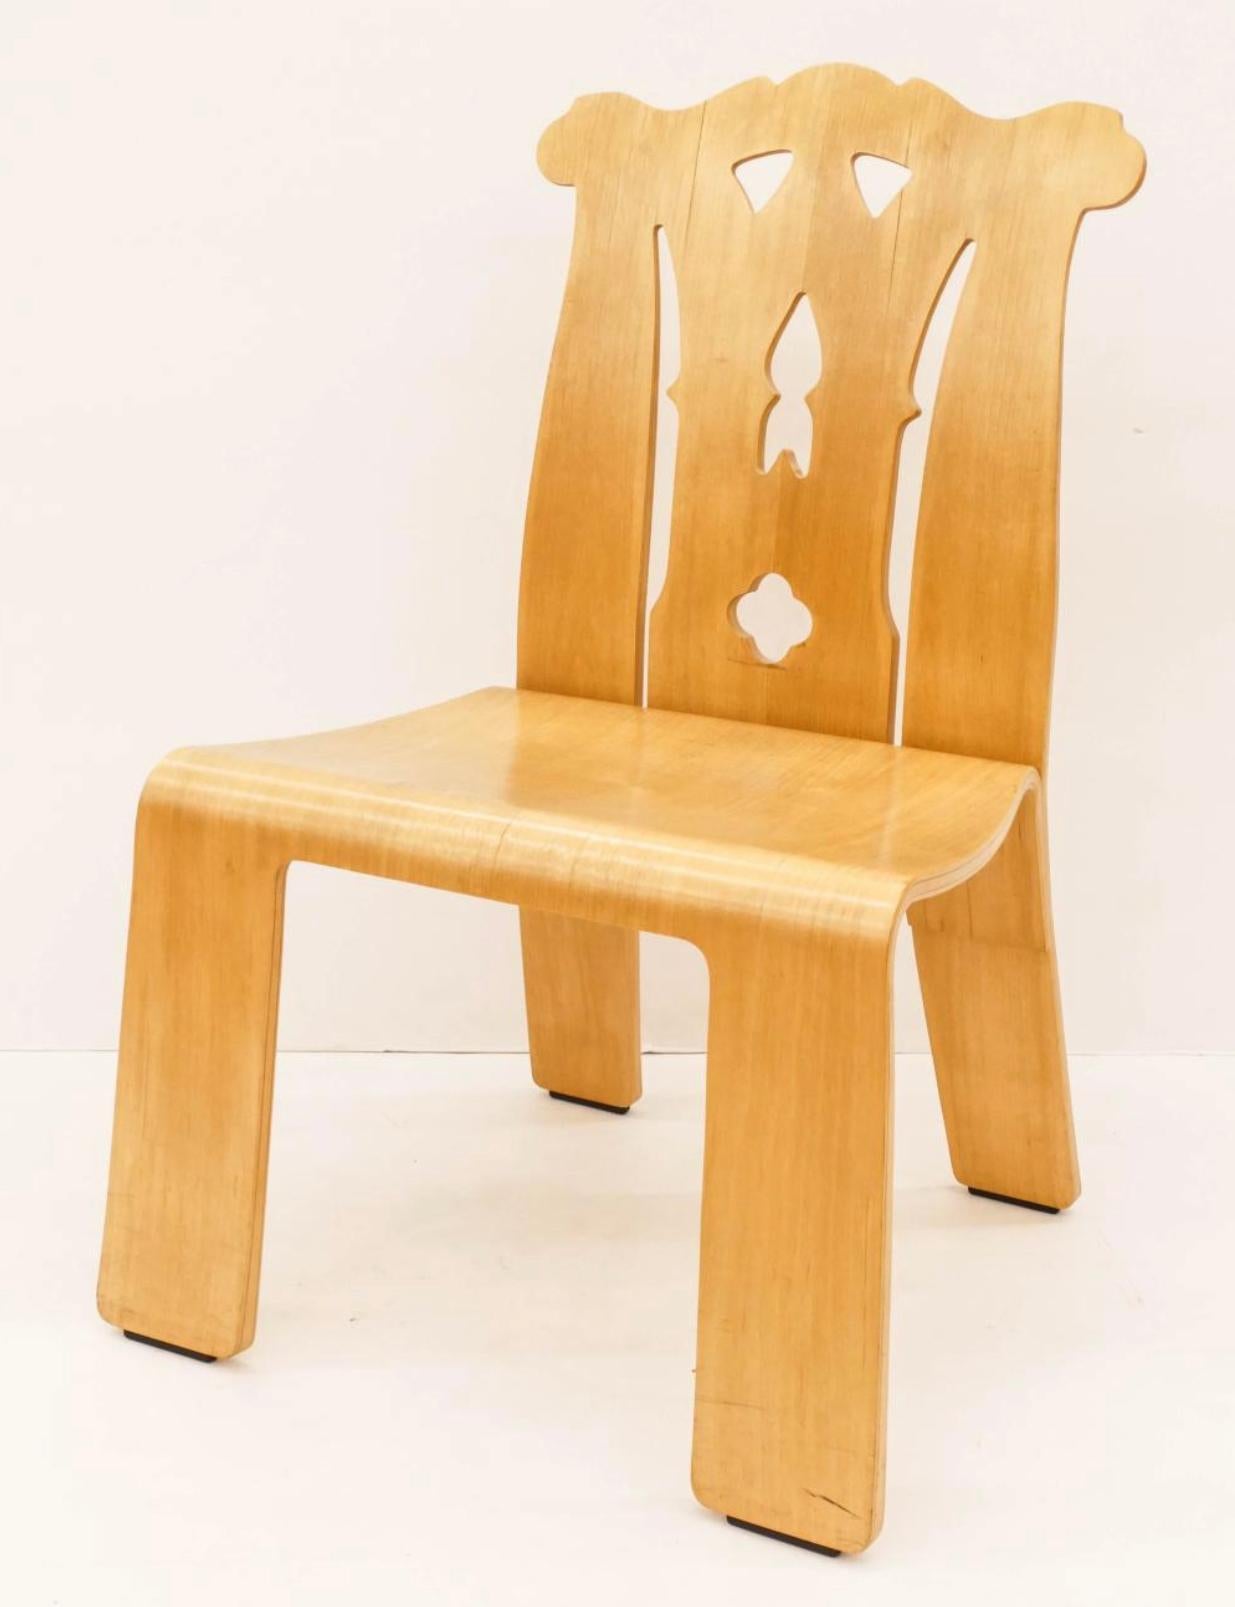 Robert Venturi for Knoll Postmodern Chippendale Bent Plywood Lounge Chair 1984. A leader and drum beater for the Postmodern movement, Robert Venturi designed a collection of furniture alongside his partner in design and life, Denise Scott Brown, for